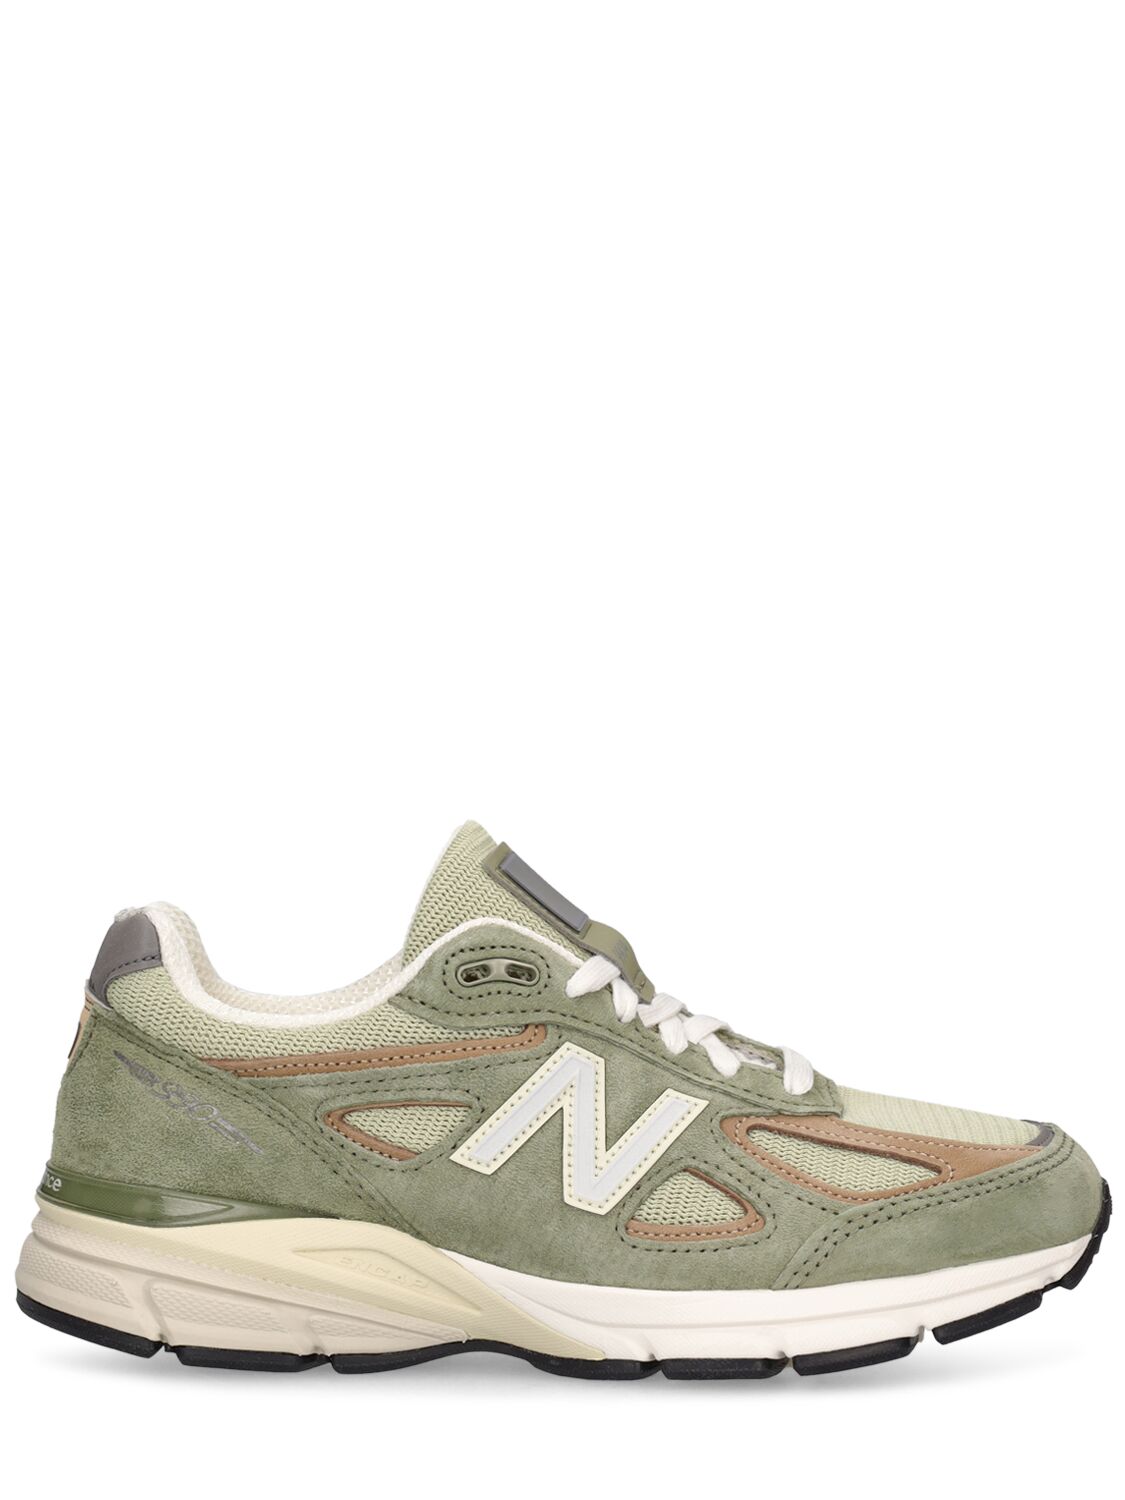 NEW BALANCE 990 MADE IN USA trainers